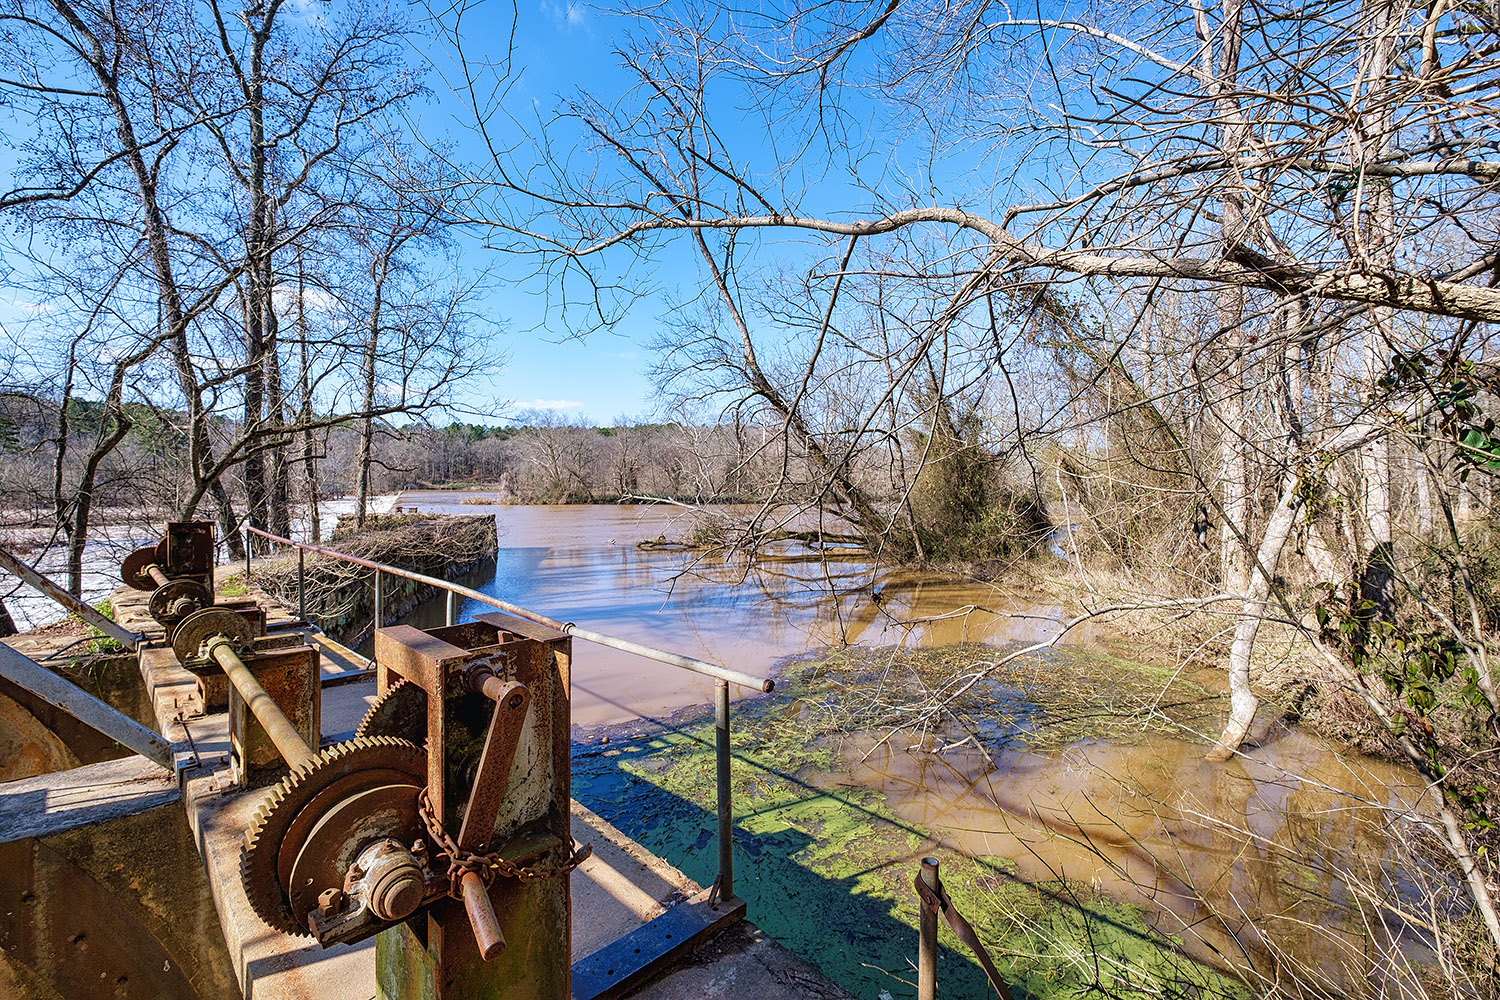 By the Haw River after a heavy rainfall